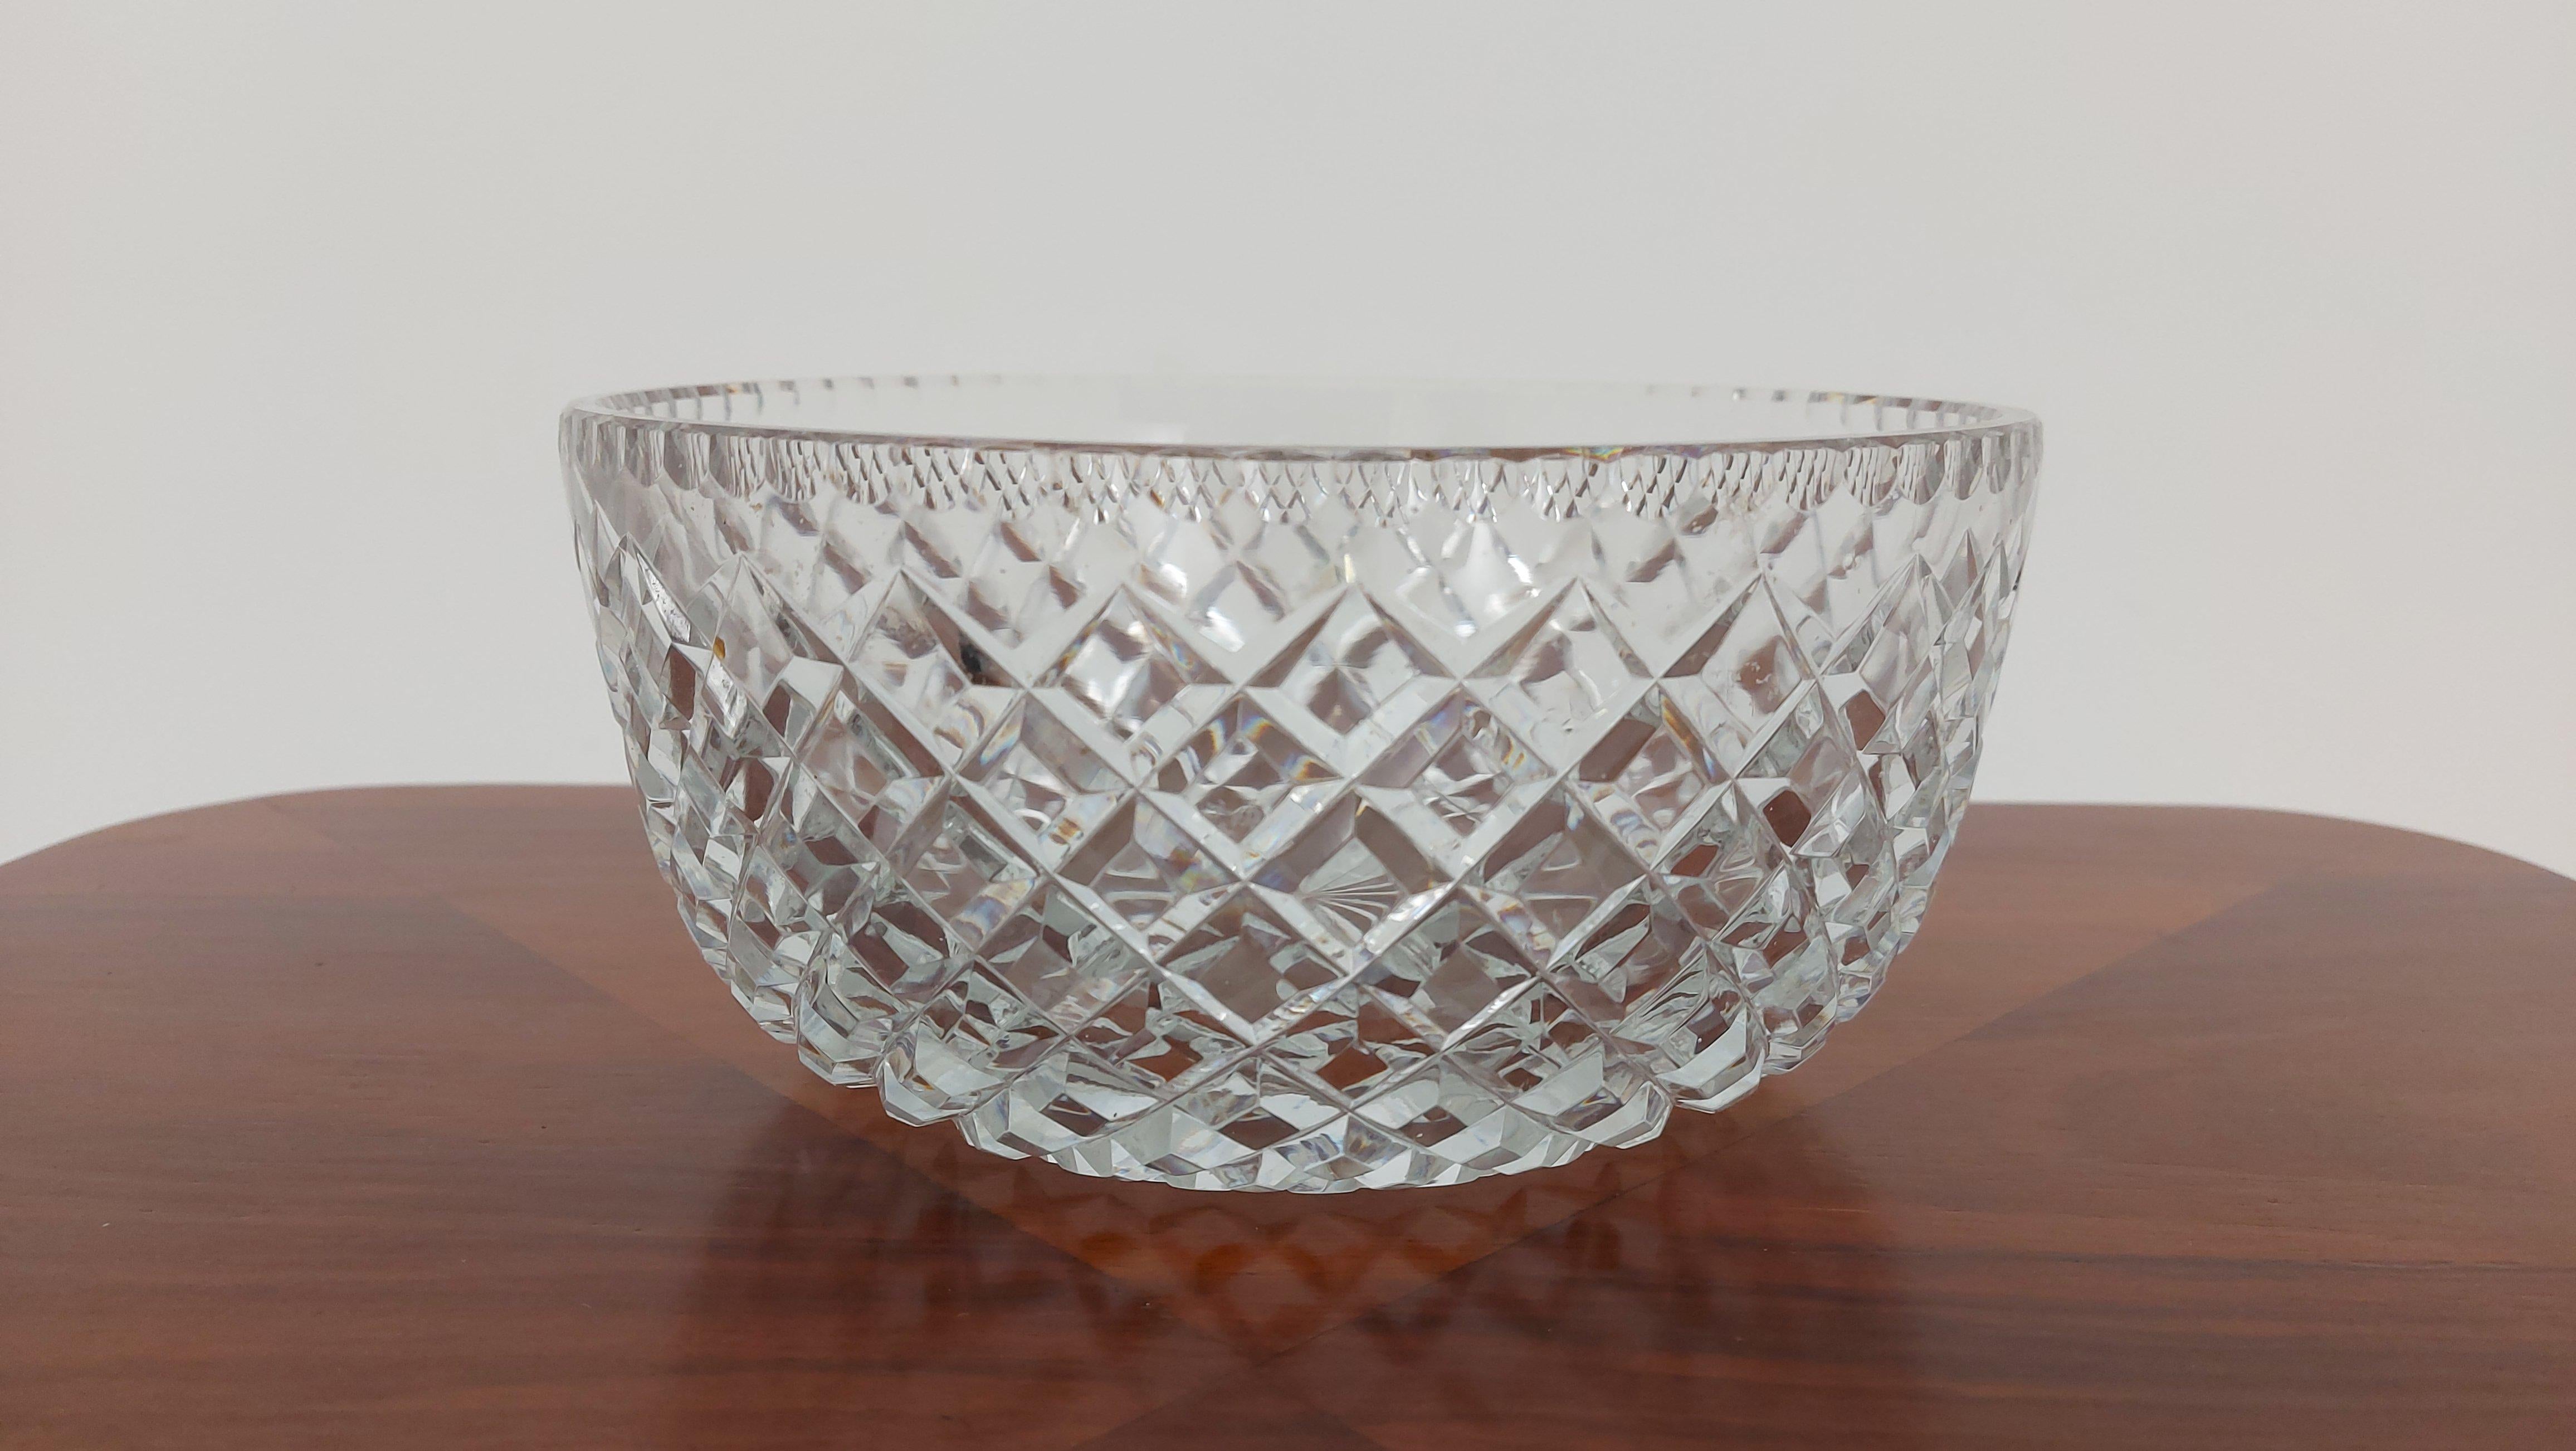 Crystal bowl for fruit or sweets.

Made in Poland in the 1950s / 1960s.

Very good condition.

Dimensions: height 10.5 cm / diameter 22 cm.